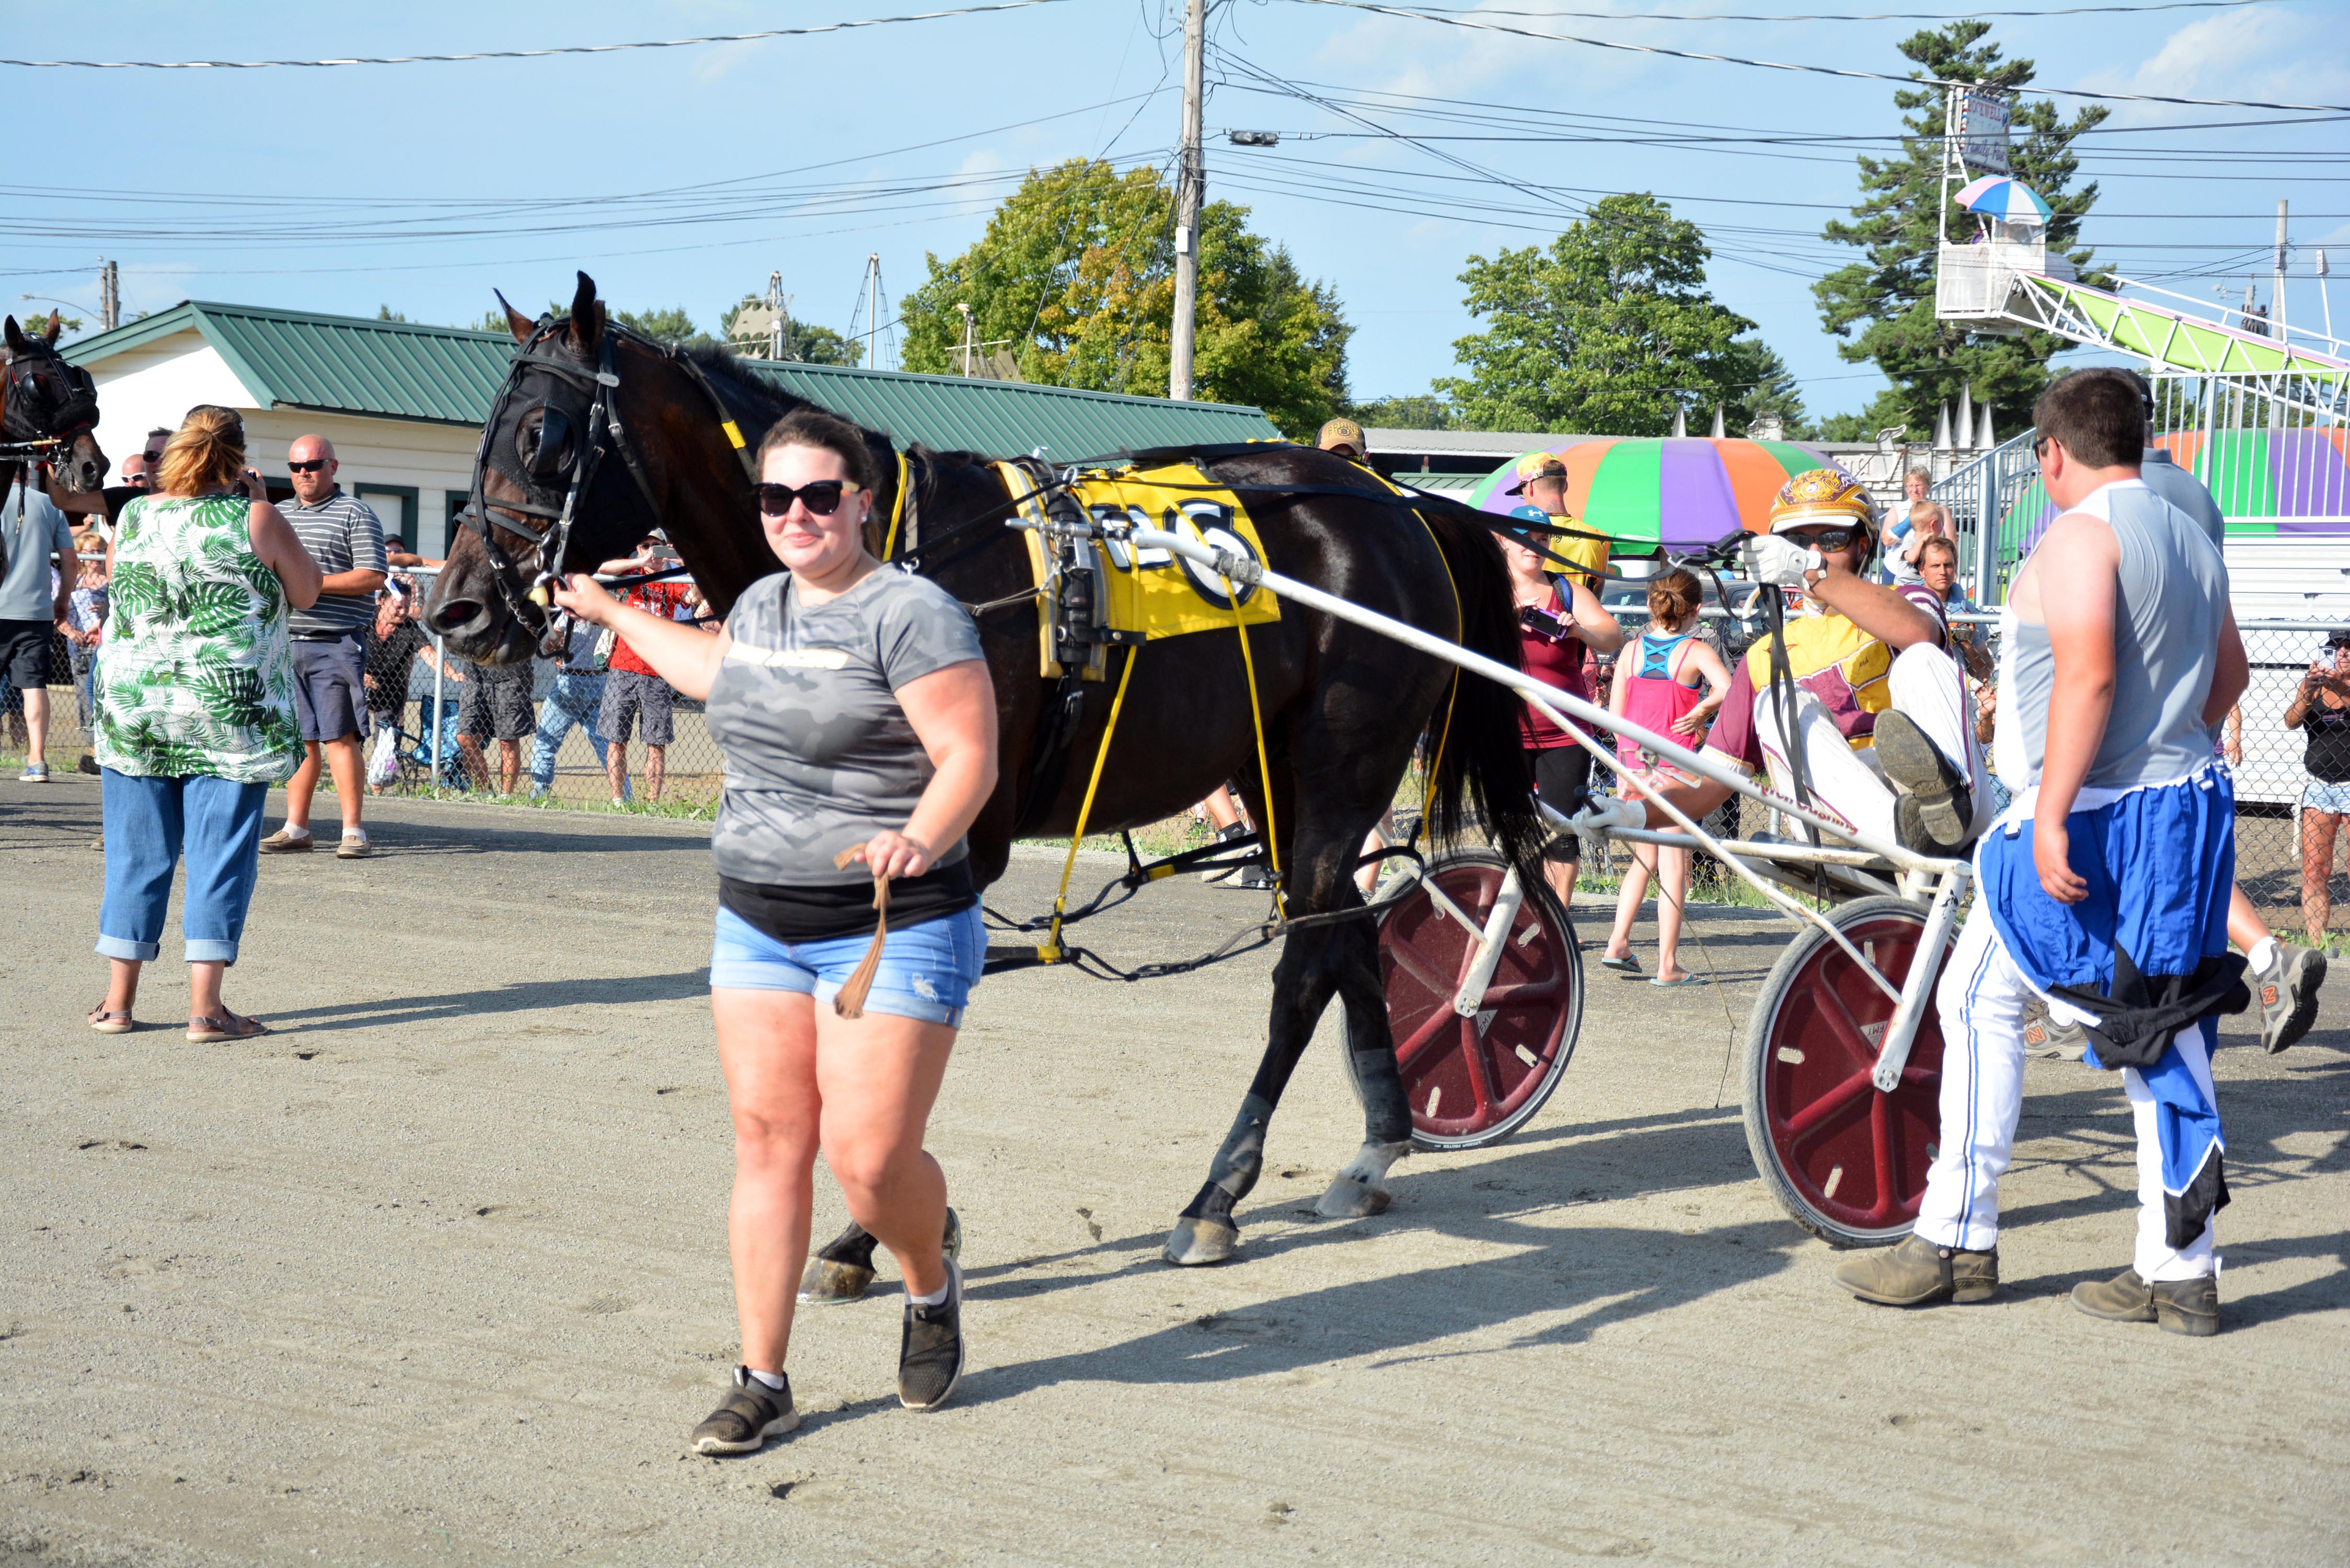 In the Winner’s Circle After Race 12 at the Windsor Fair, Kennebec County, Maine